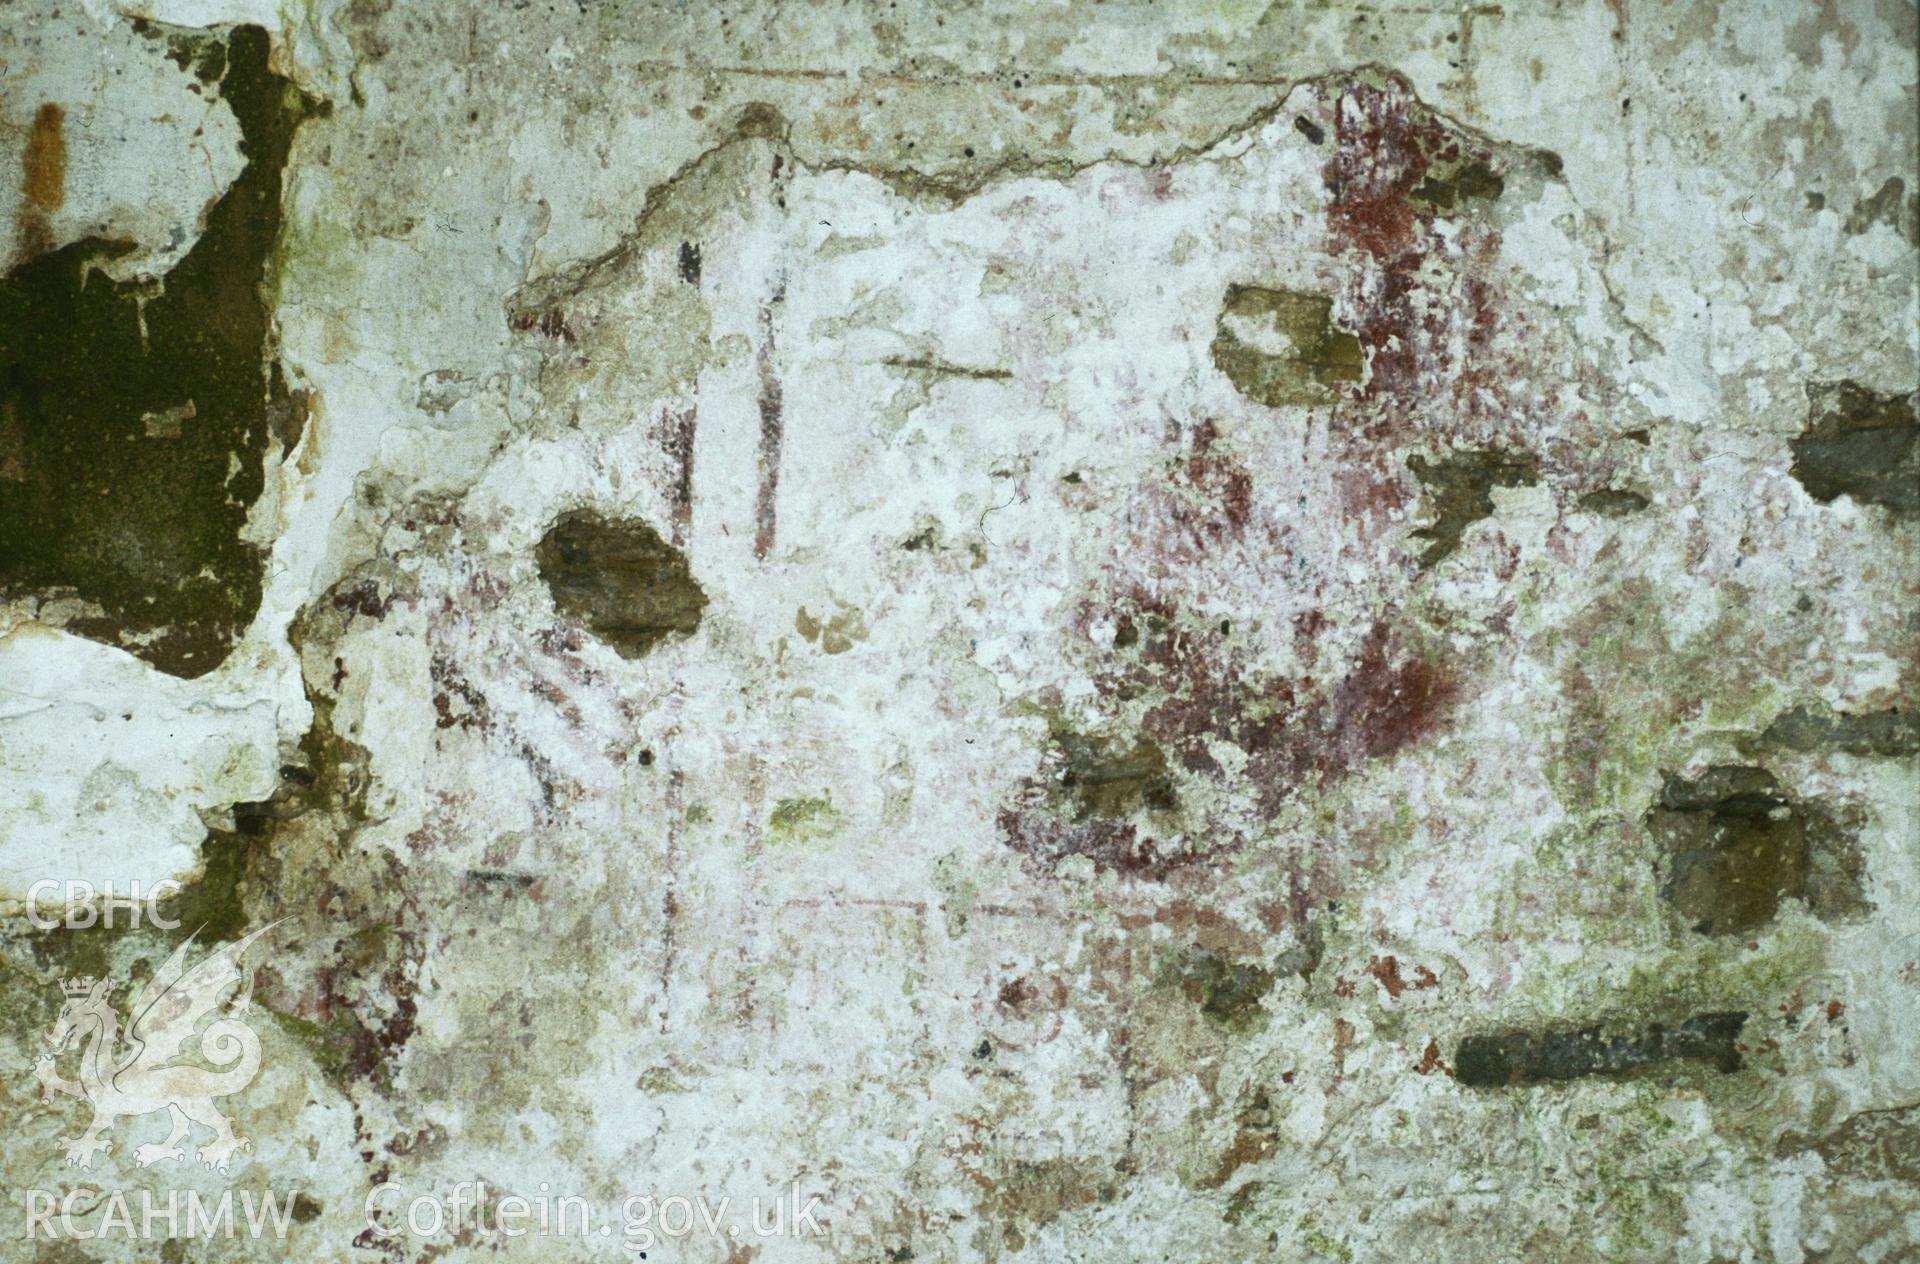 RCAHMW colour transparency showing wallpainting at St Teilo's Church, Llandeilo Talybont, photographed in 1984.